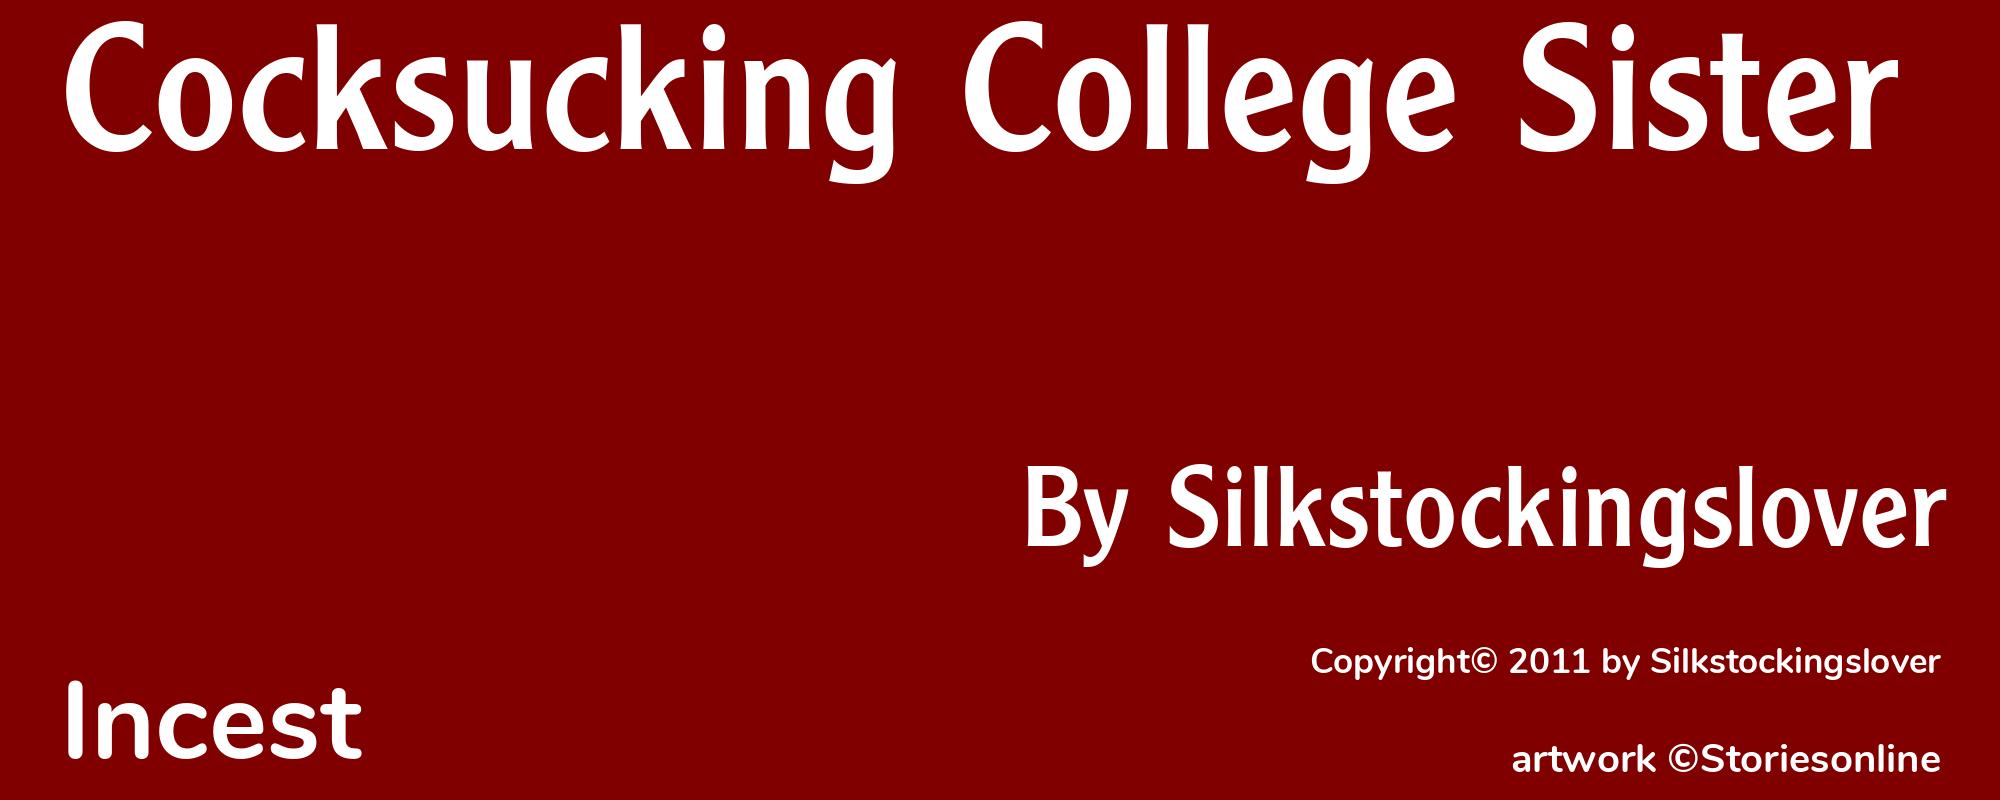 Cocksucking College Sister - Cover